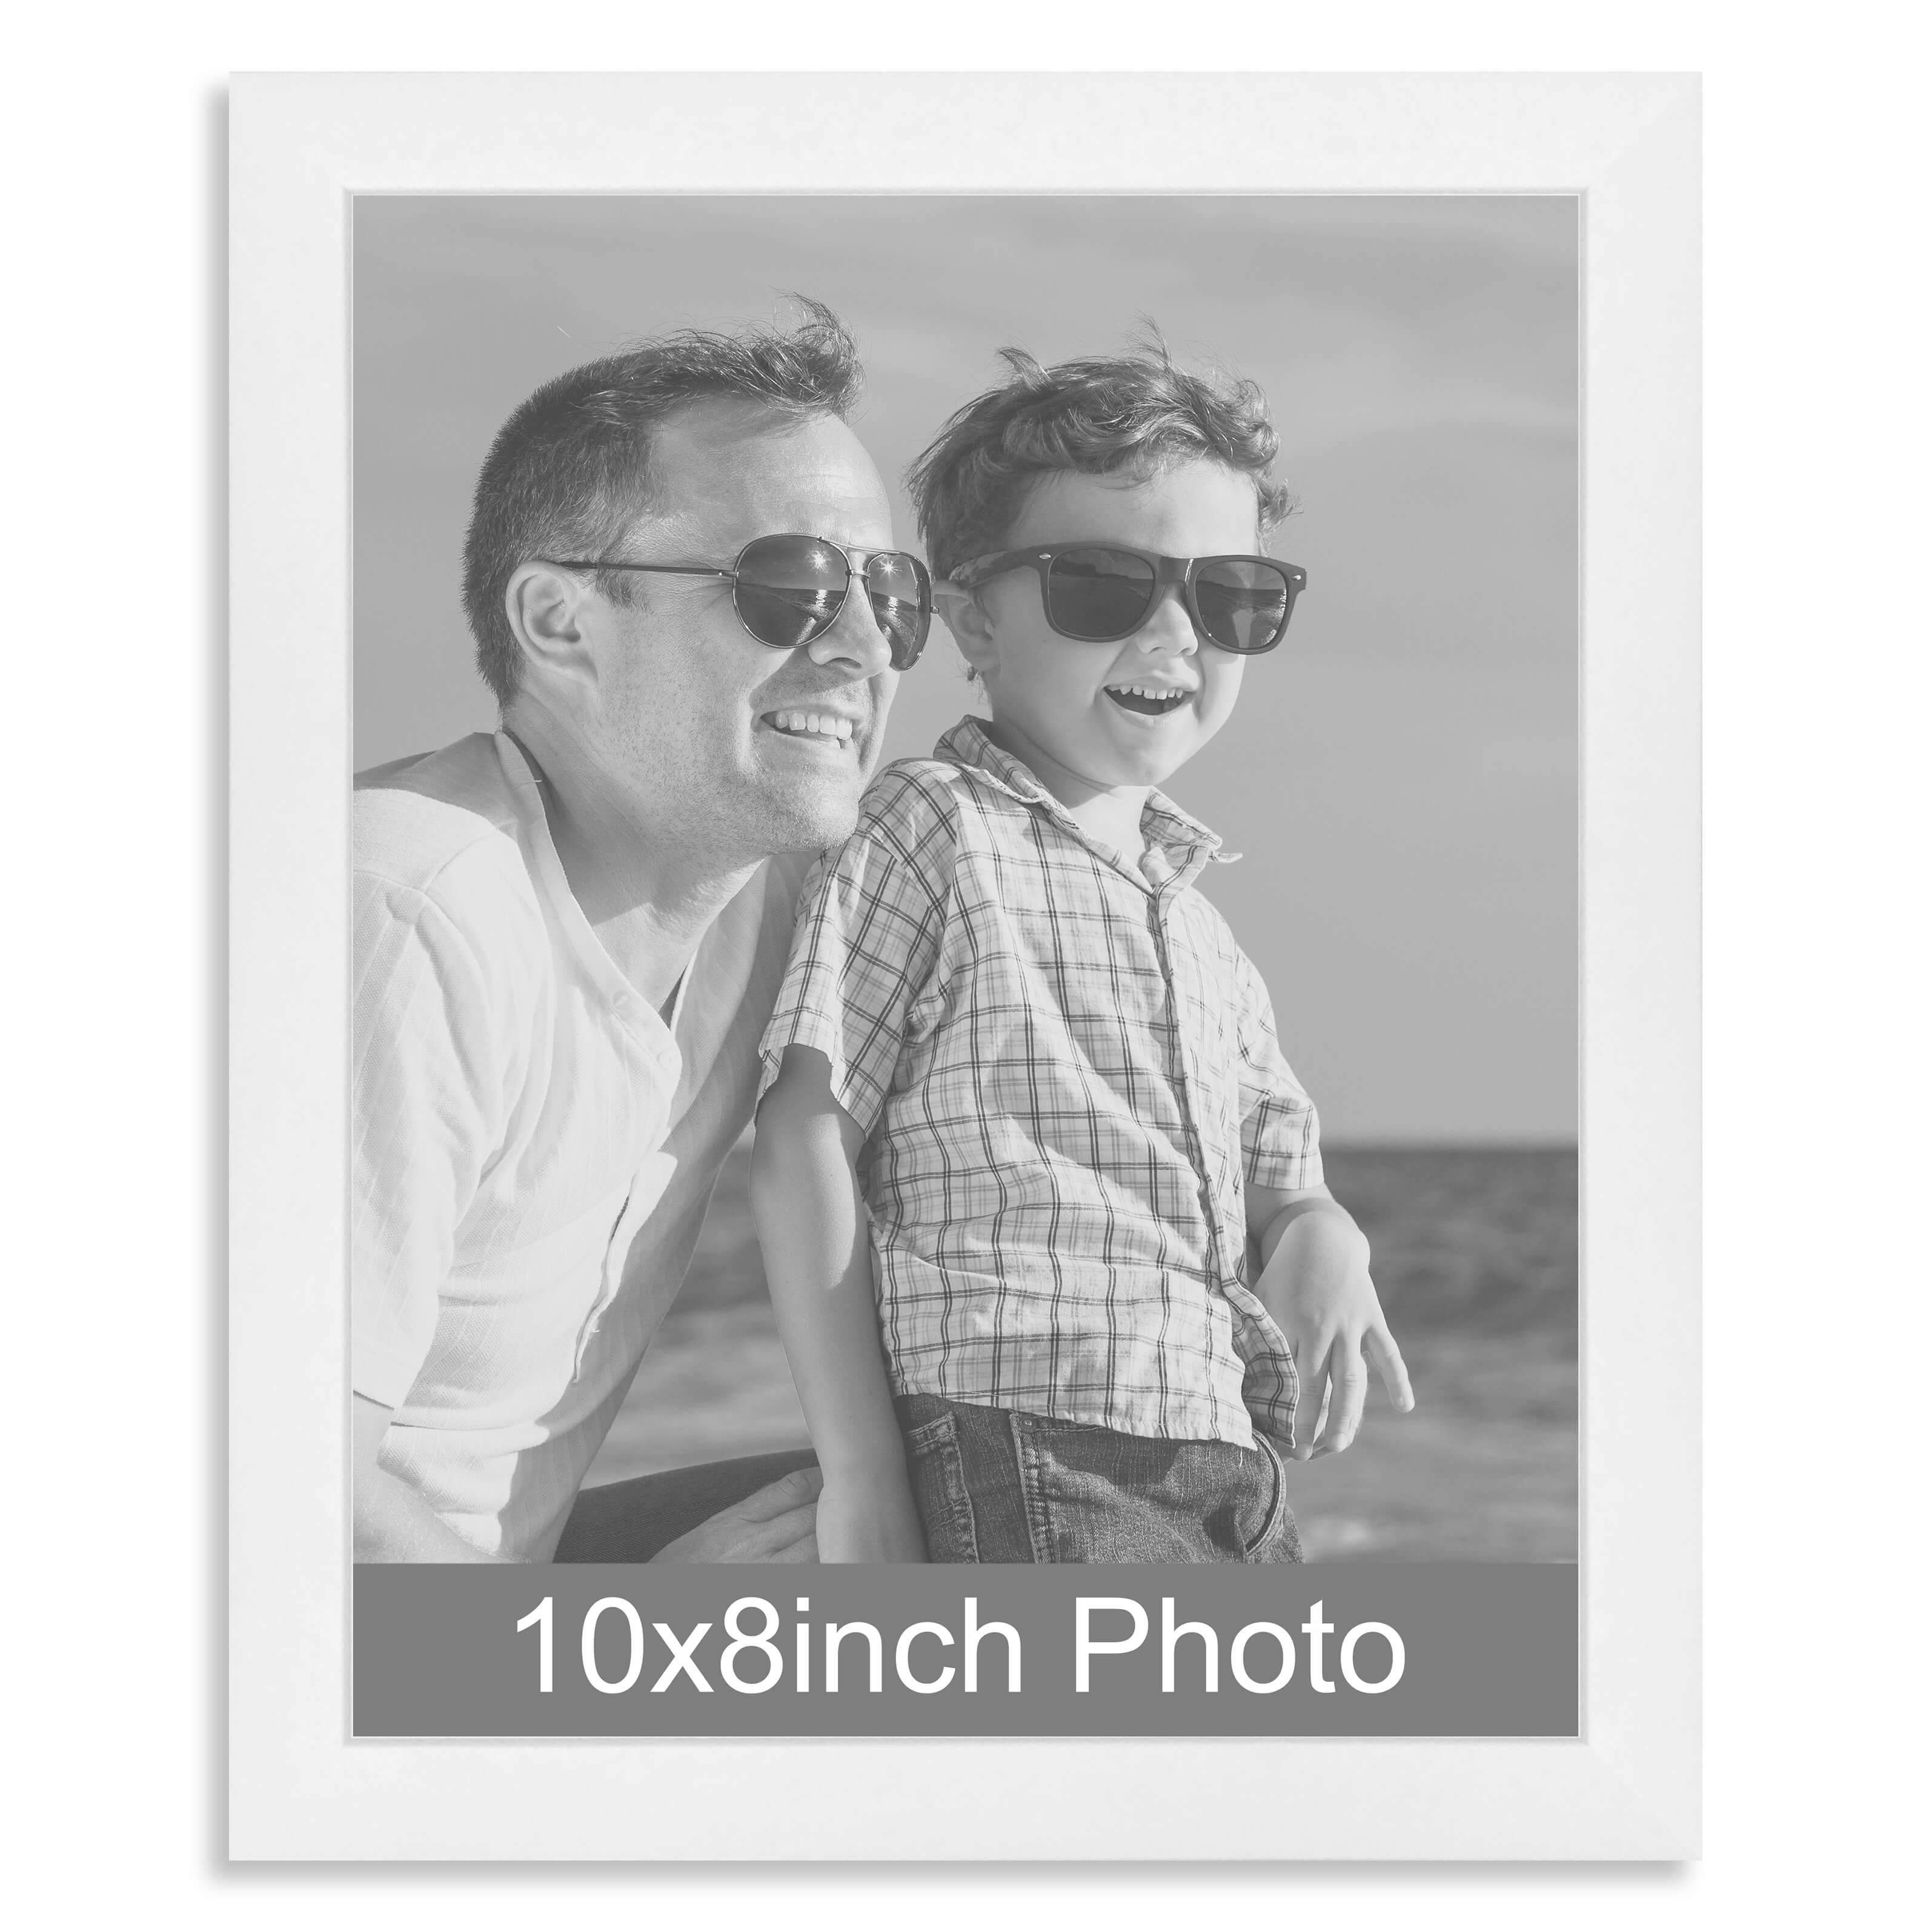 10 x 8inch White Wooden Photo Frame for a 10×8/8x10in image – Photo to follow on email